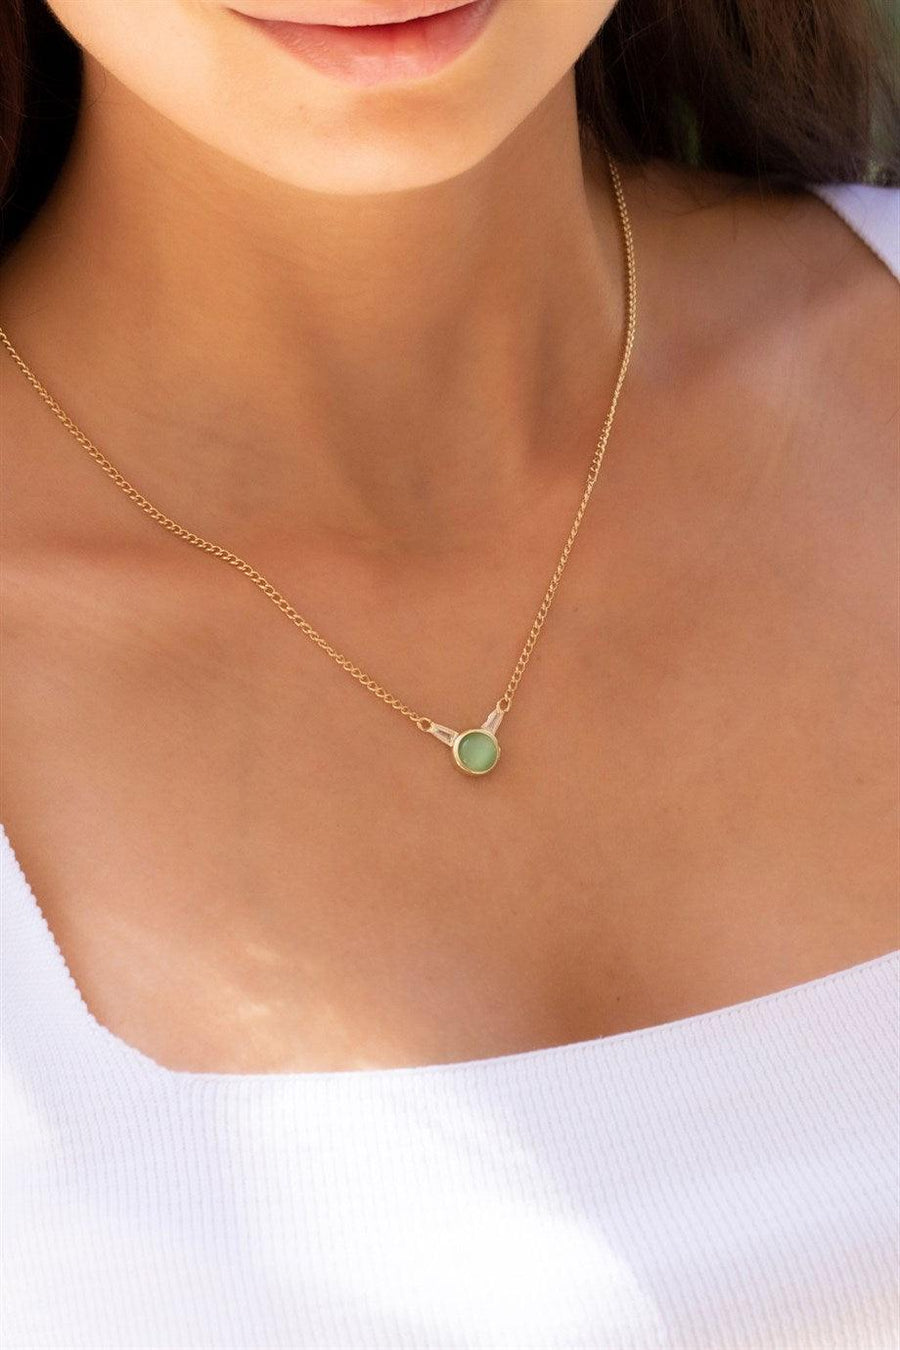 Gold Green Stone Design Necklace